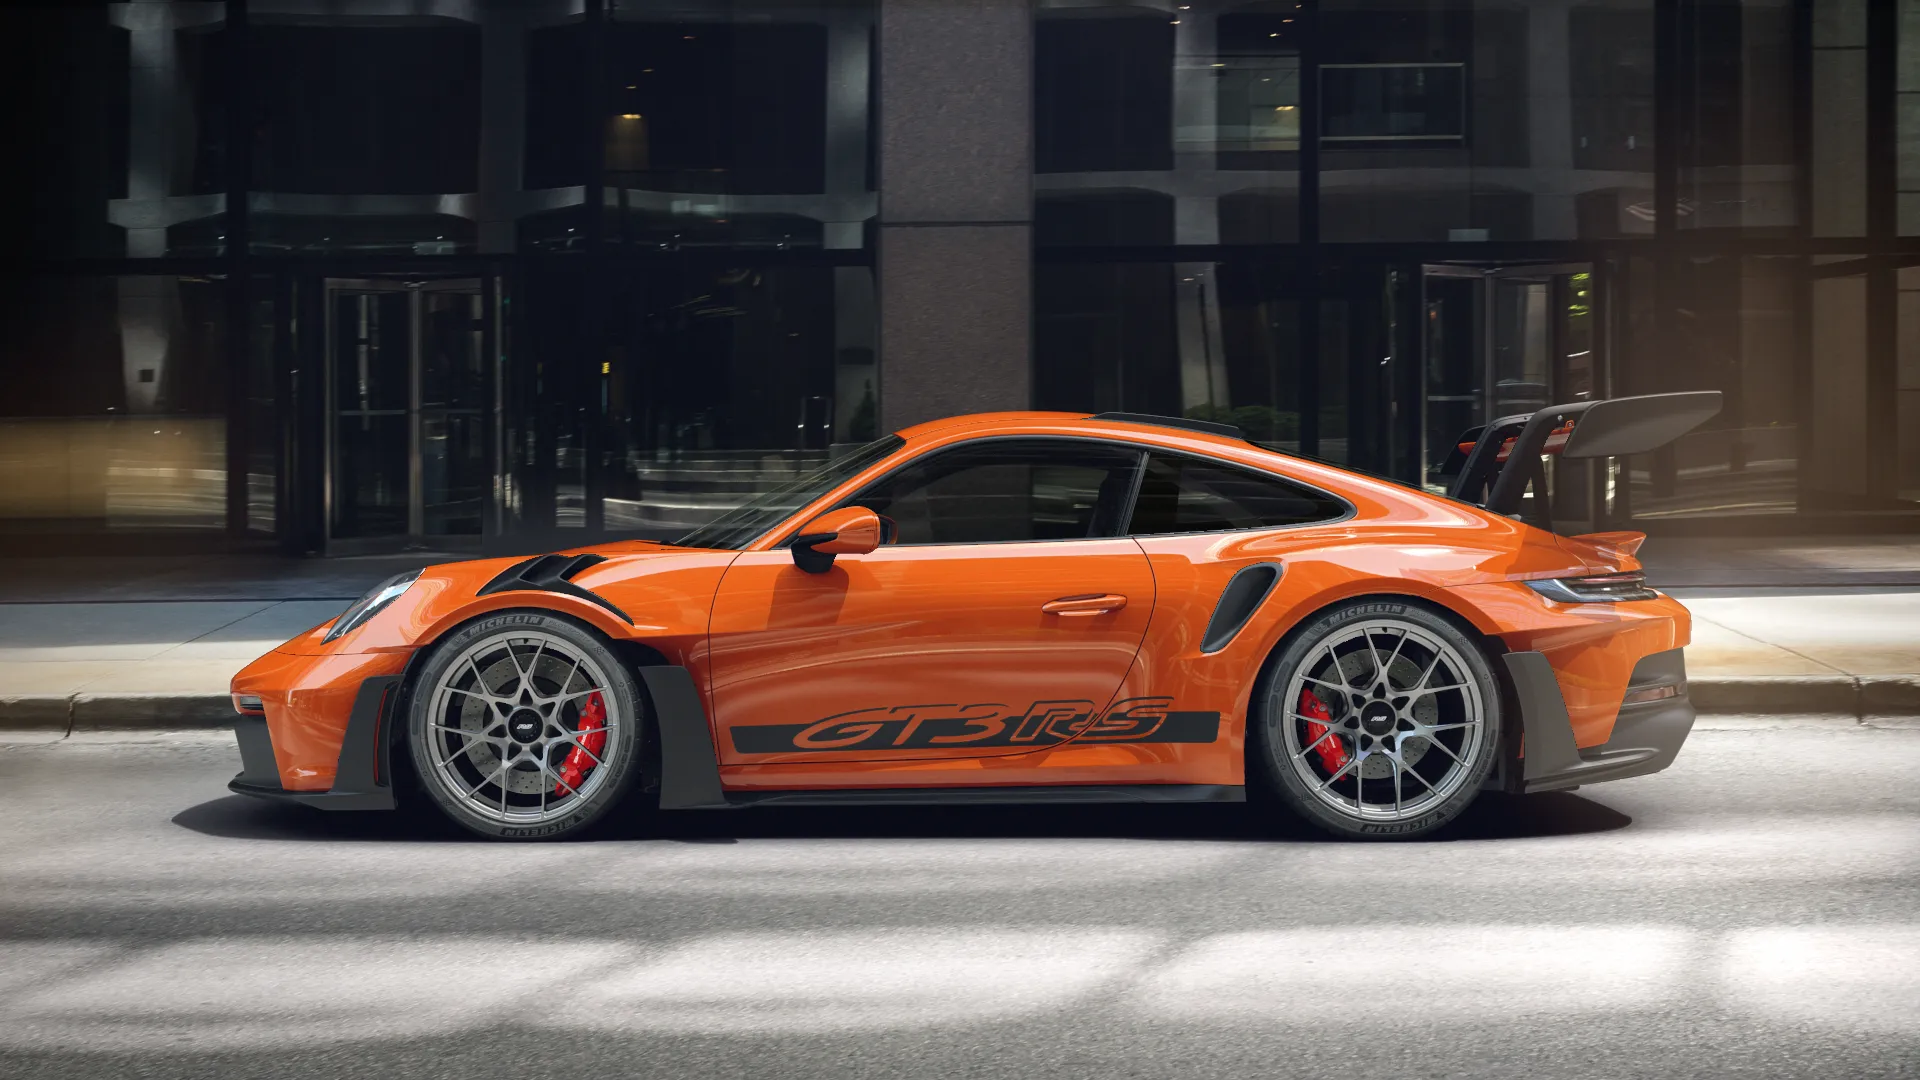 Exterior view of 911 GT3 RS